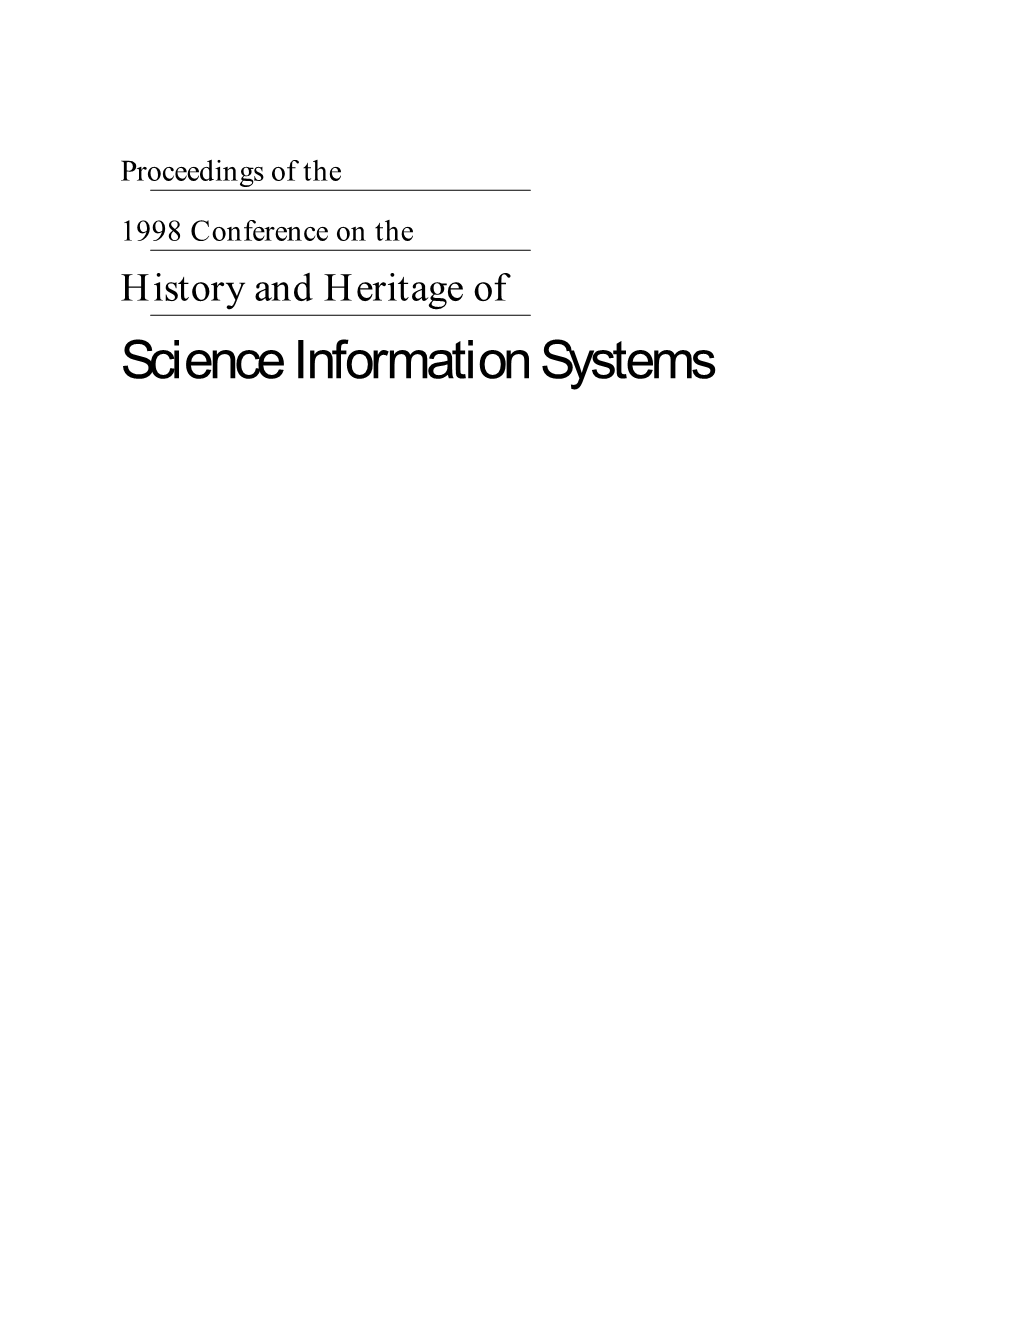 Proceedings of the 1998 Conference on the History and Heritage of Science Information Systems Generously Supported By